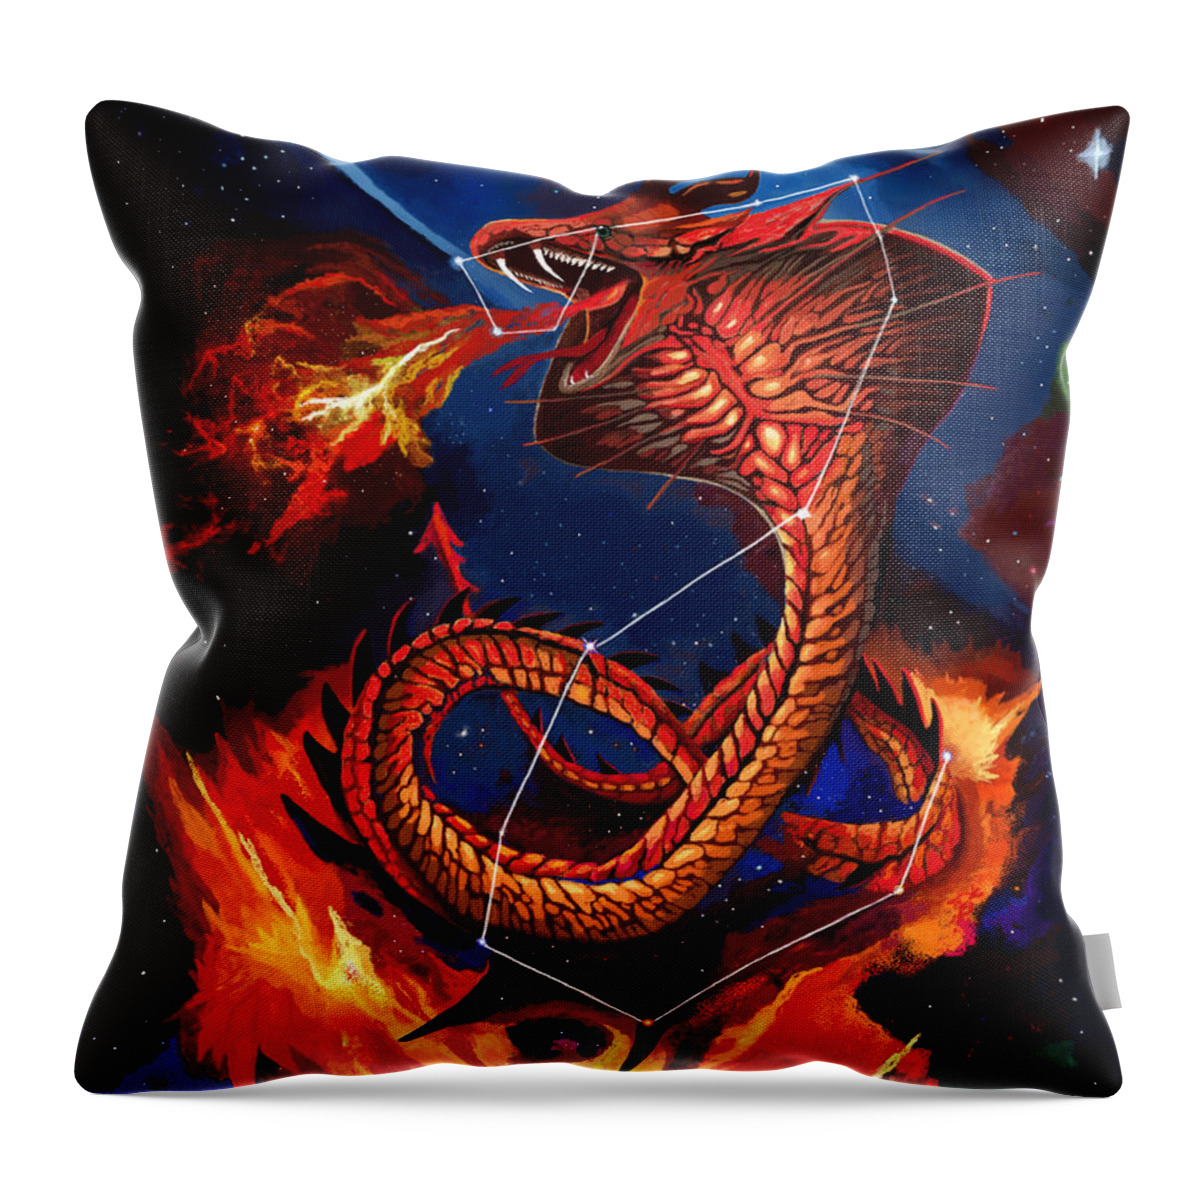 Draco Throw Pillow featuring the painting Draco Constellation by Jackie Case